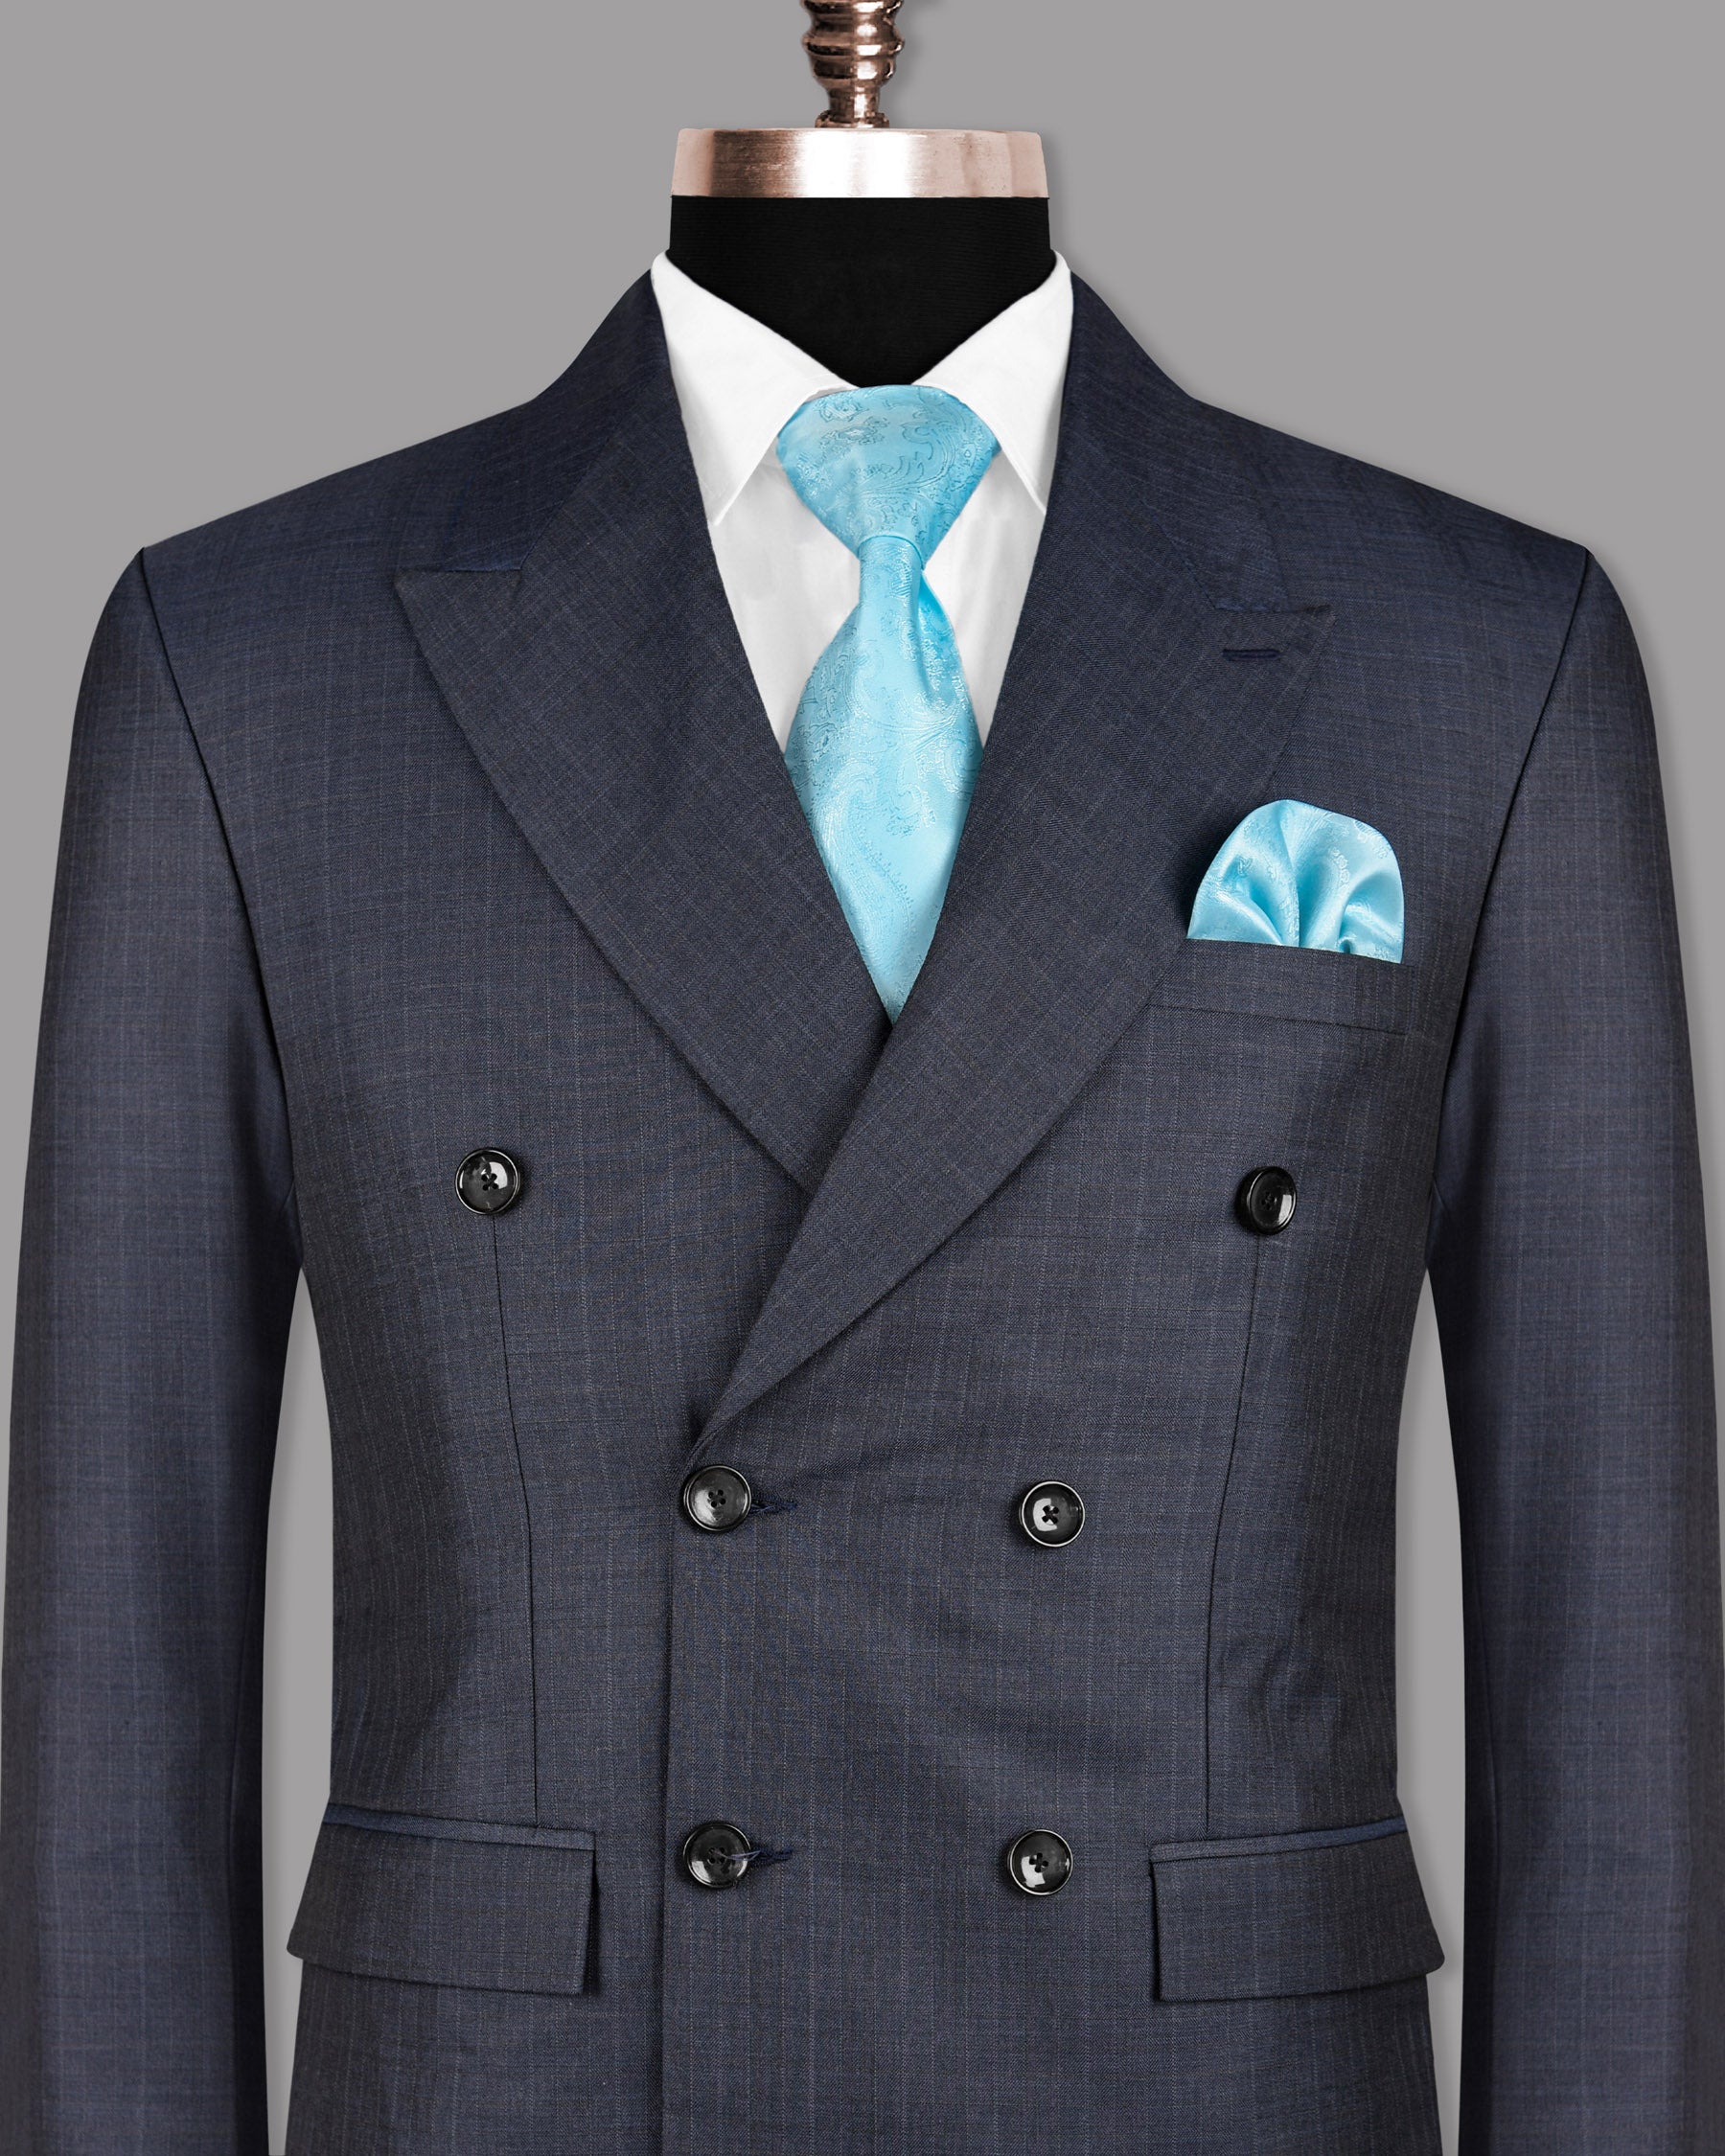 Ship Gray with Blue Tonal Subtle Checked Double Breasted Blazer BL1033-DB-42, BL1033-DB-50, BL1033-DB-52, BL1033-DB-40, BL1033-DB-36, BL1033-DB-38, BL1033-DB-44, BL1033-DB-46, BL1033-DB-48, BL1033-DB-54, BL1033-DB-56, BL1033-DB-58, BL1033-DB-60